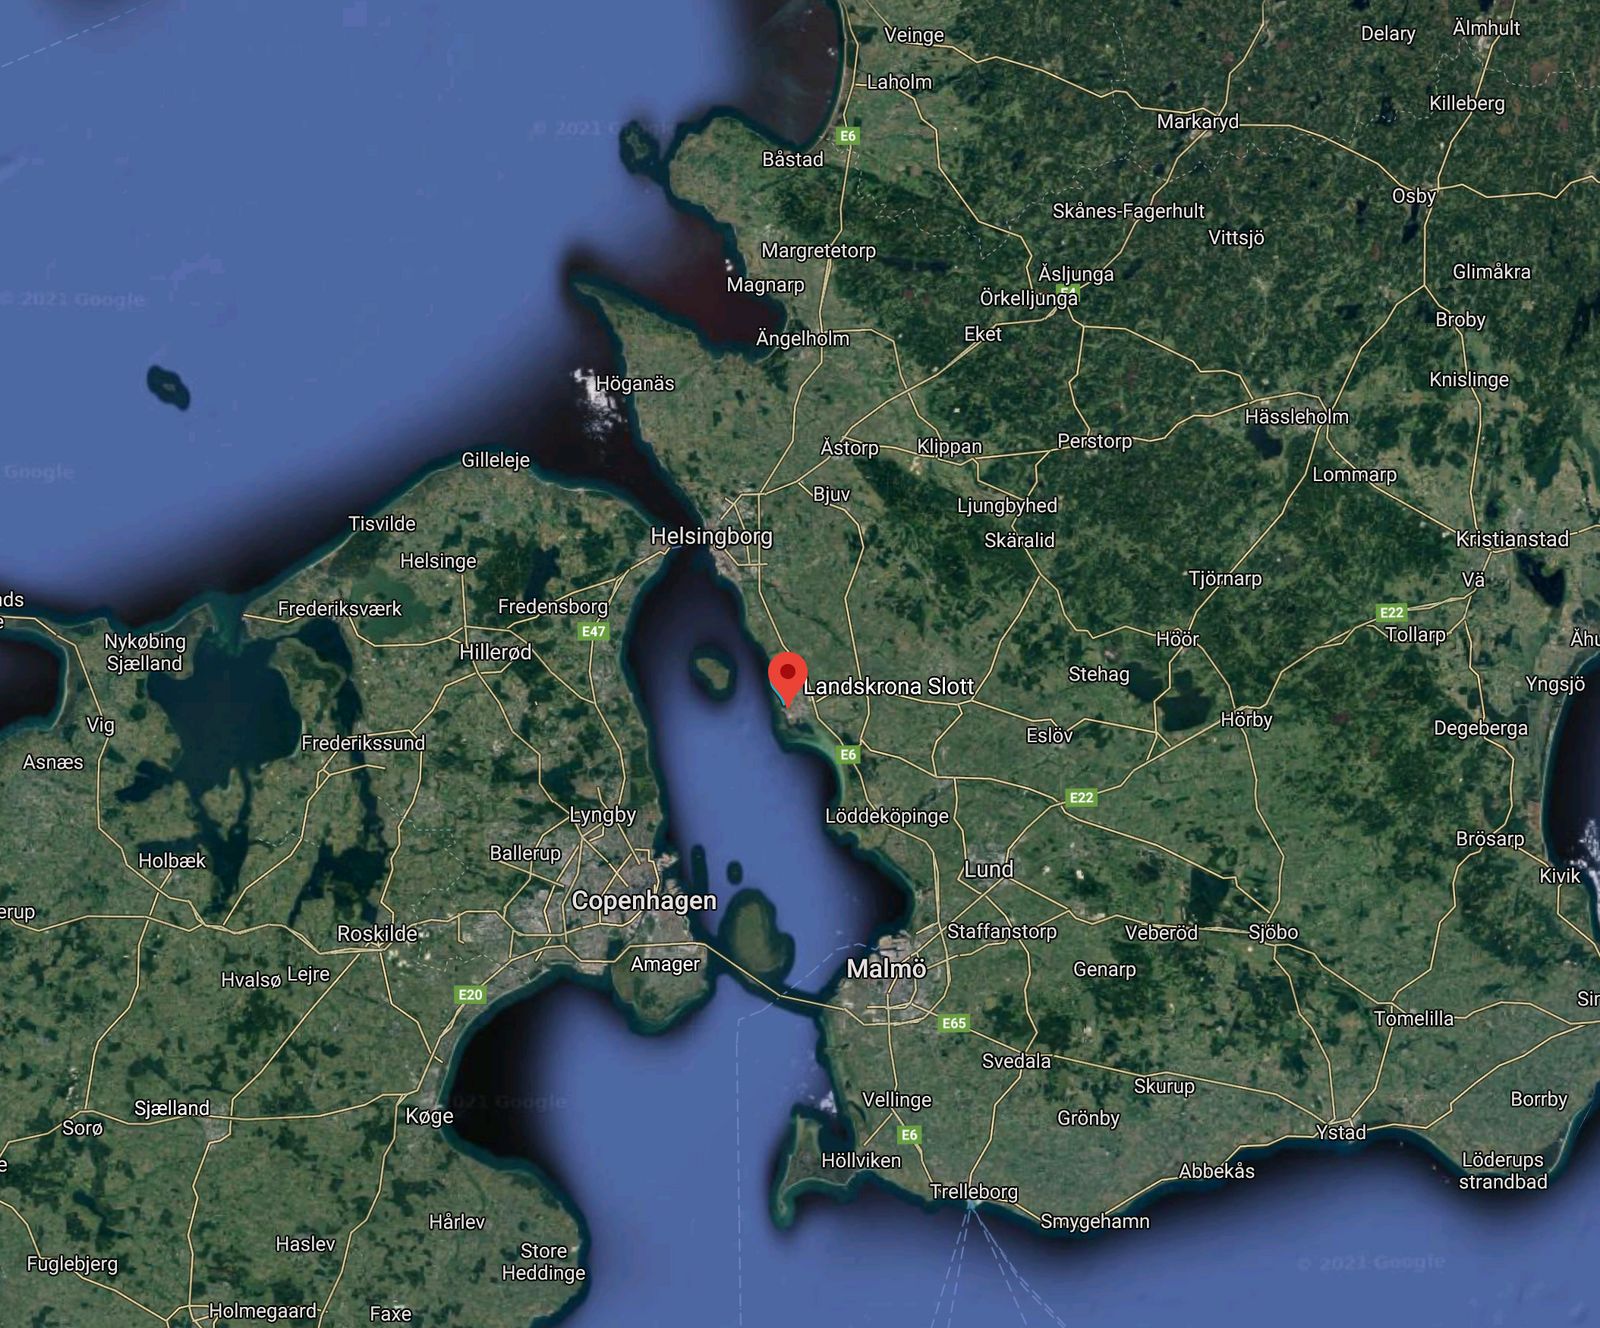 A satellite view of Landskrona from Google Maps